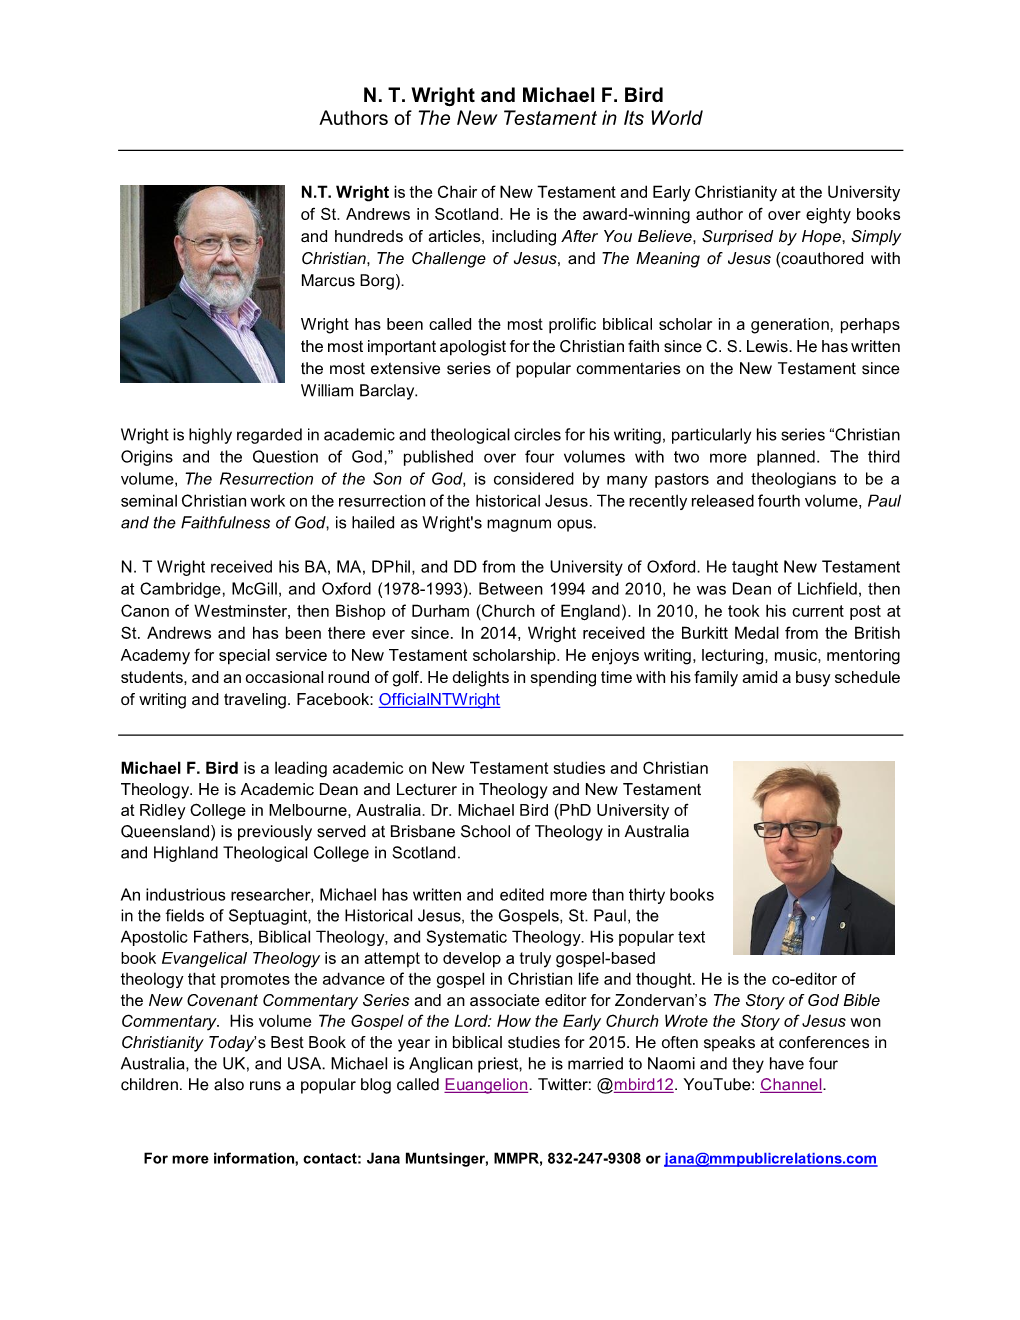 N. T. Wright and Michael F. Bird Authors of the New Testament in Its World